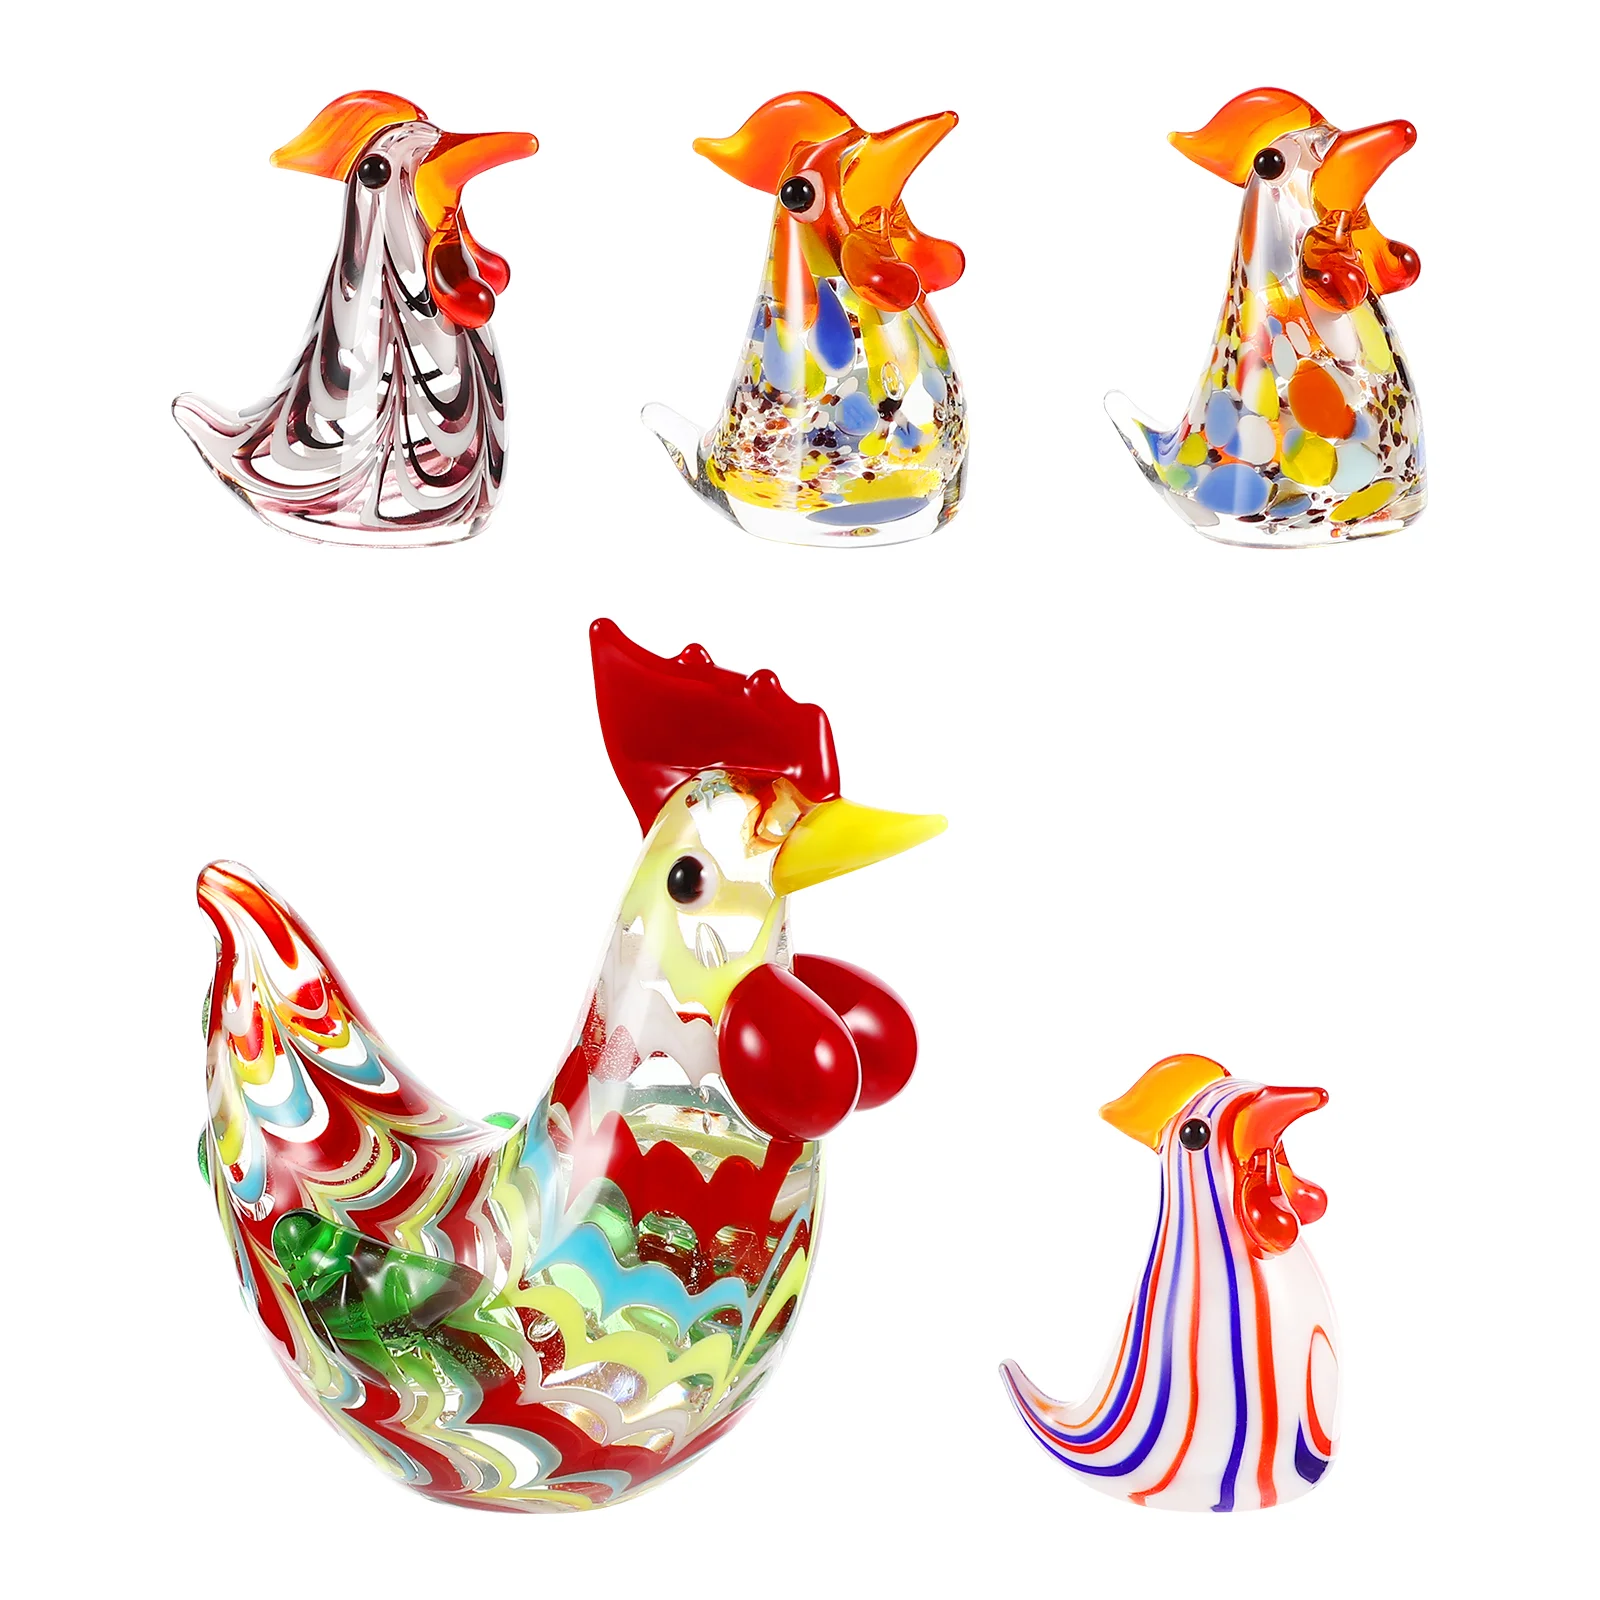 

Rooster Chicken Figurine Figurines Decor Blown Model Mini Animal Simulation White Ornament Easter Glasses Home Shaped Ornaments